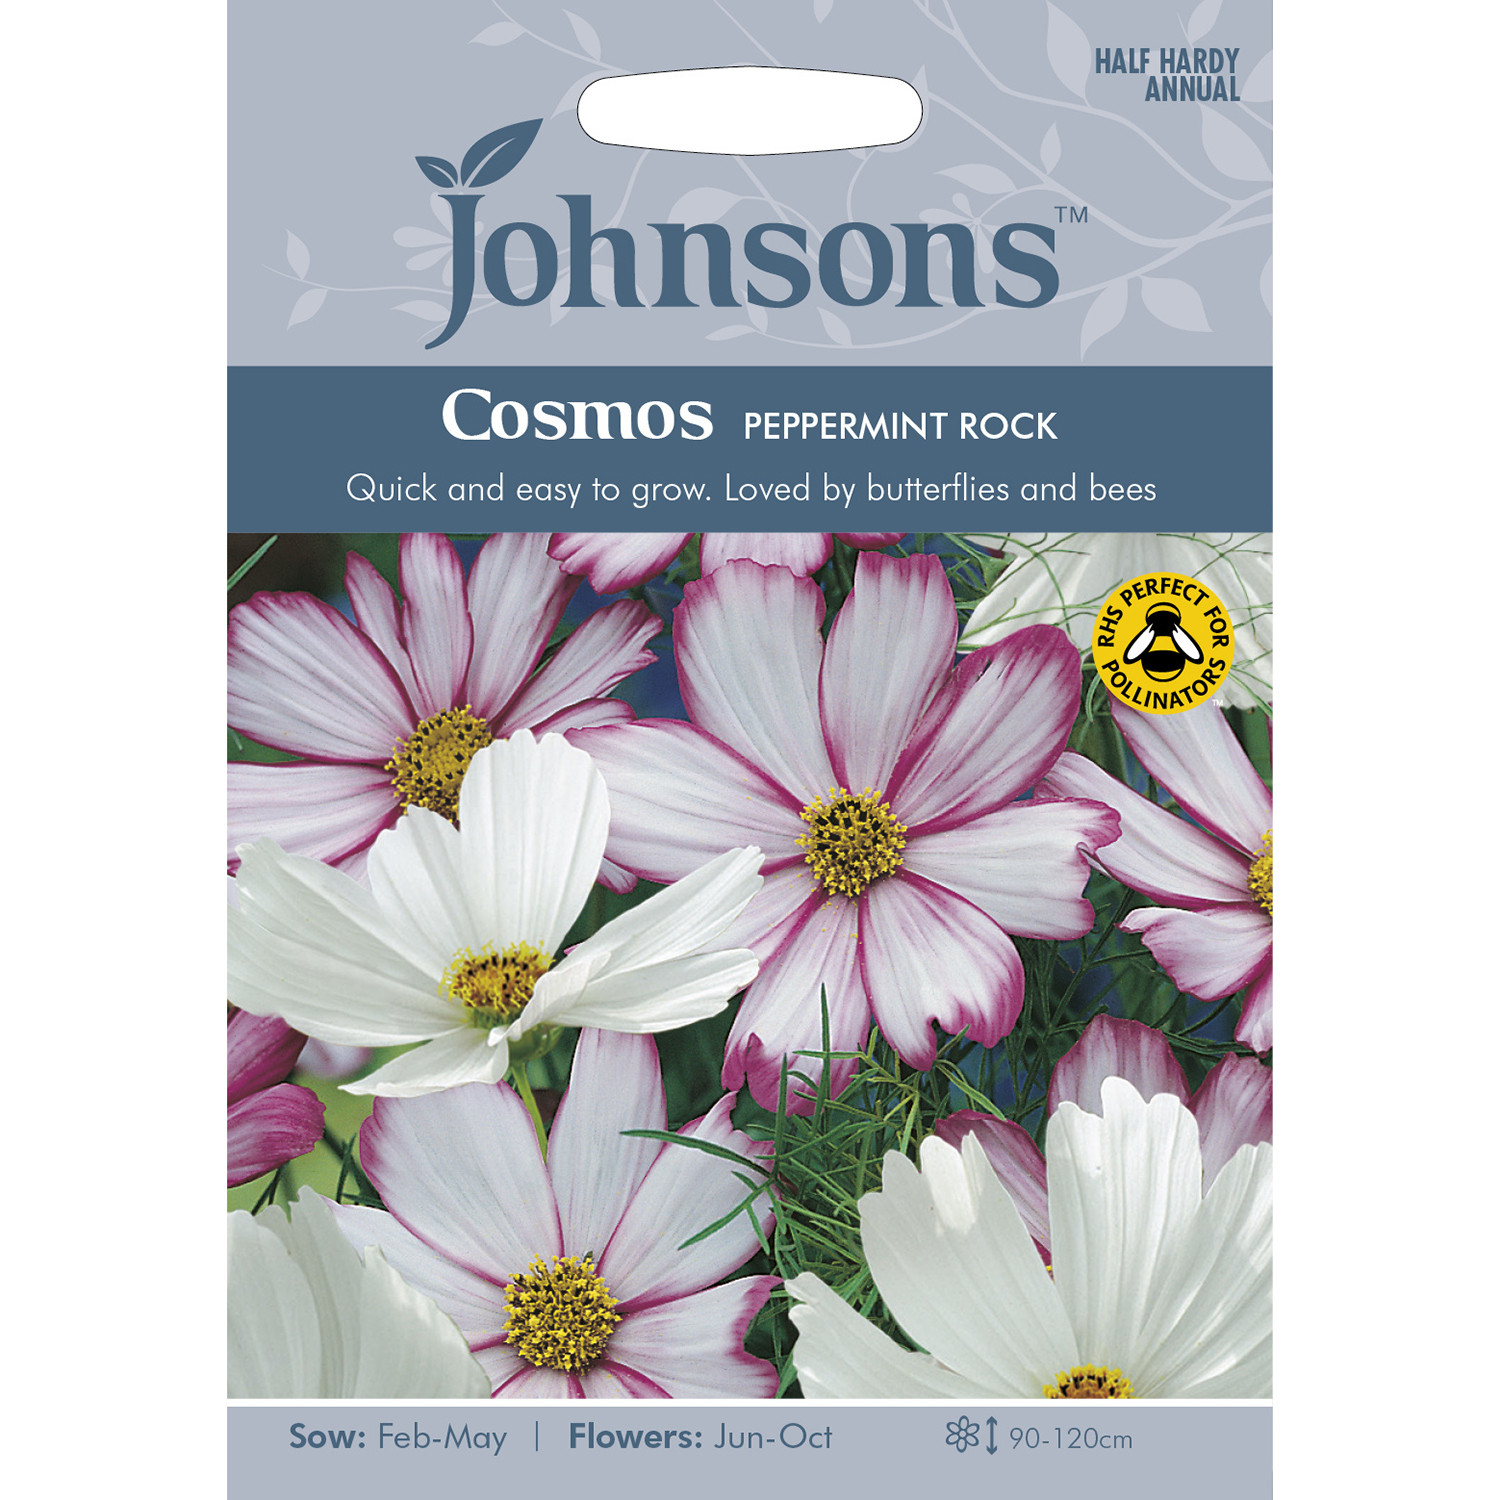 Johnsons Cosmos Peppermint Rock Flower Seeds Image 2